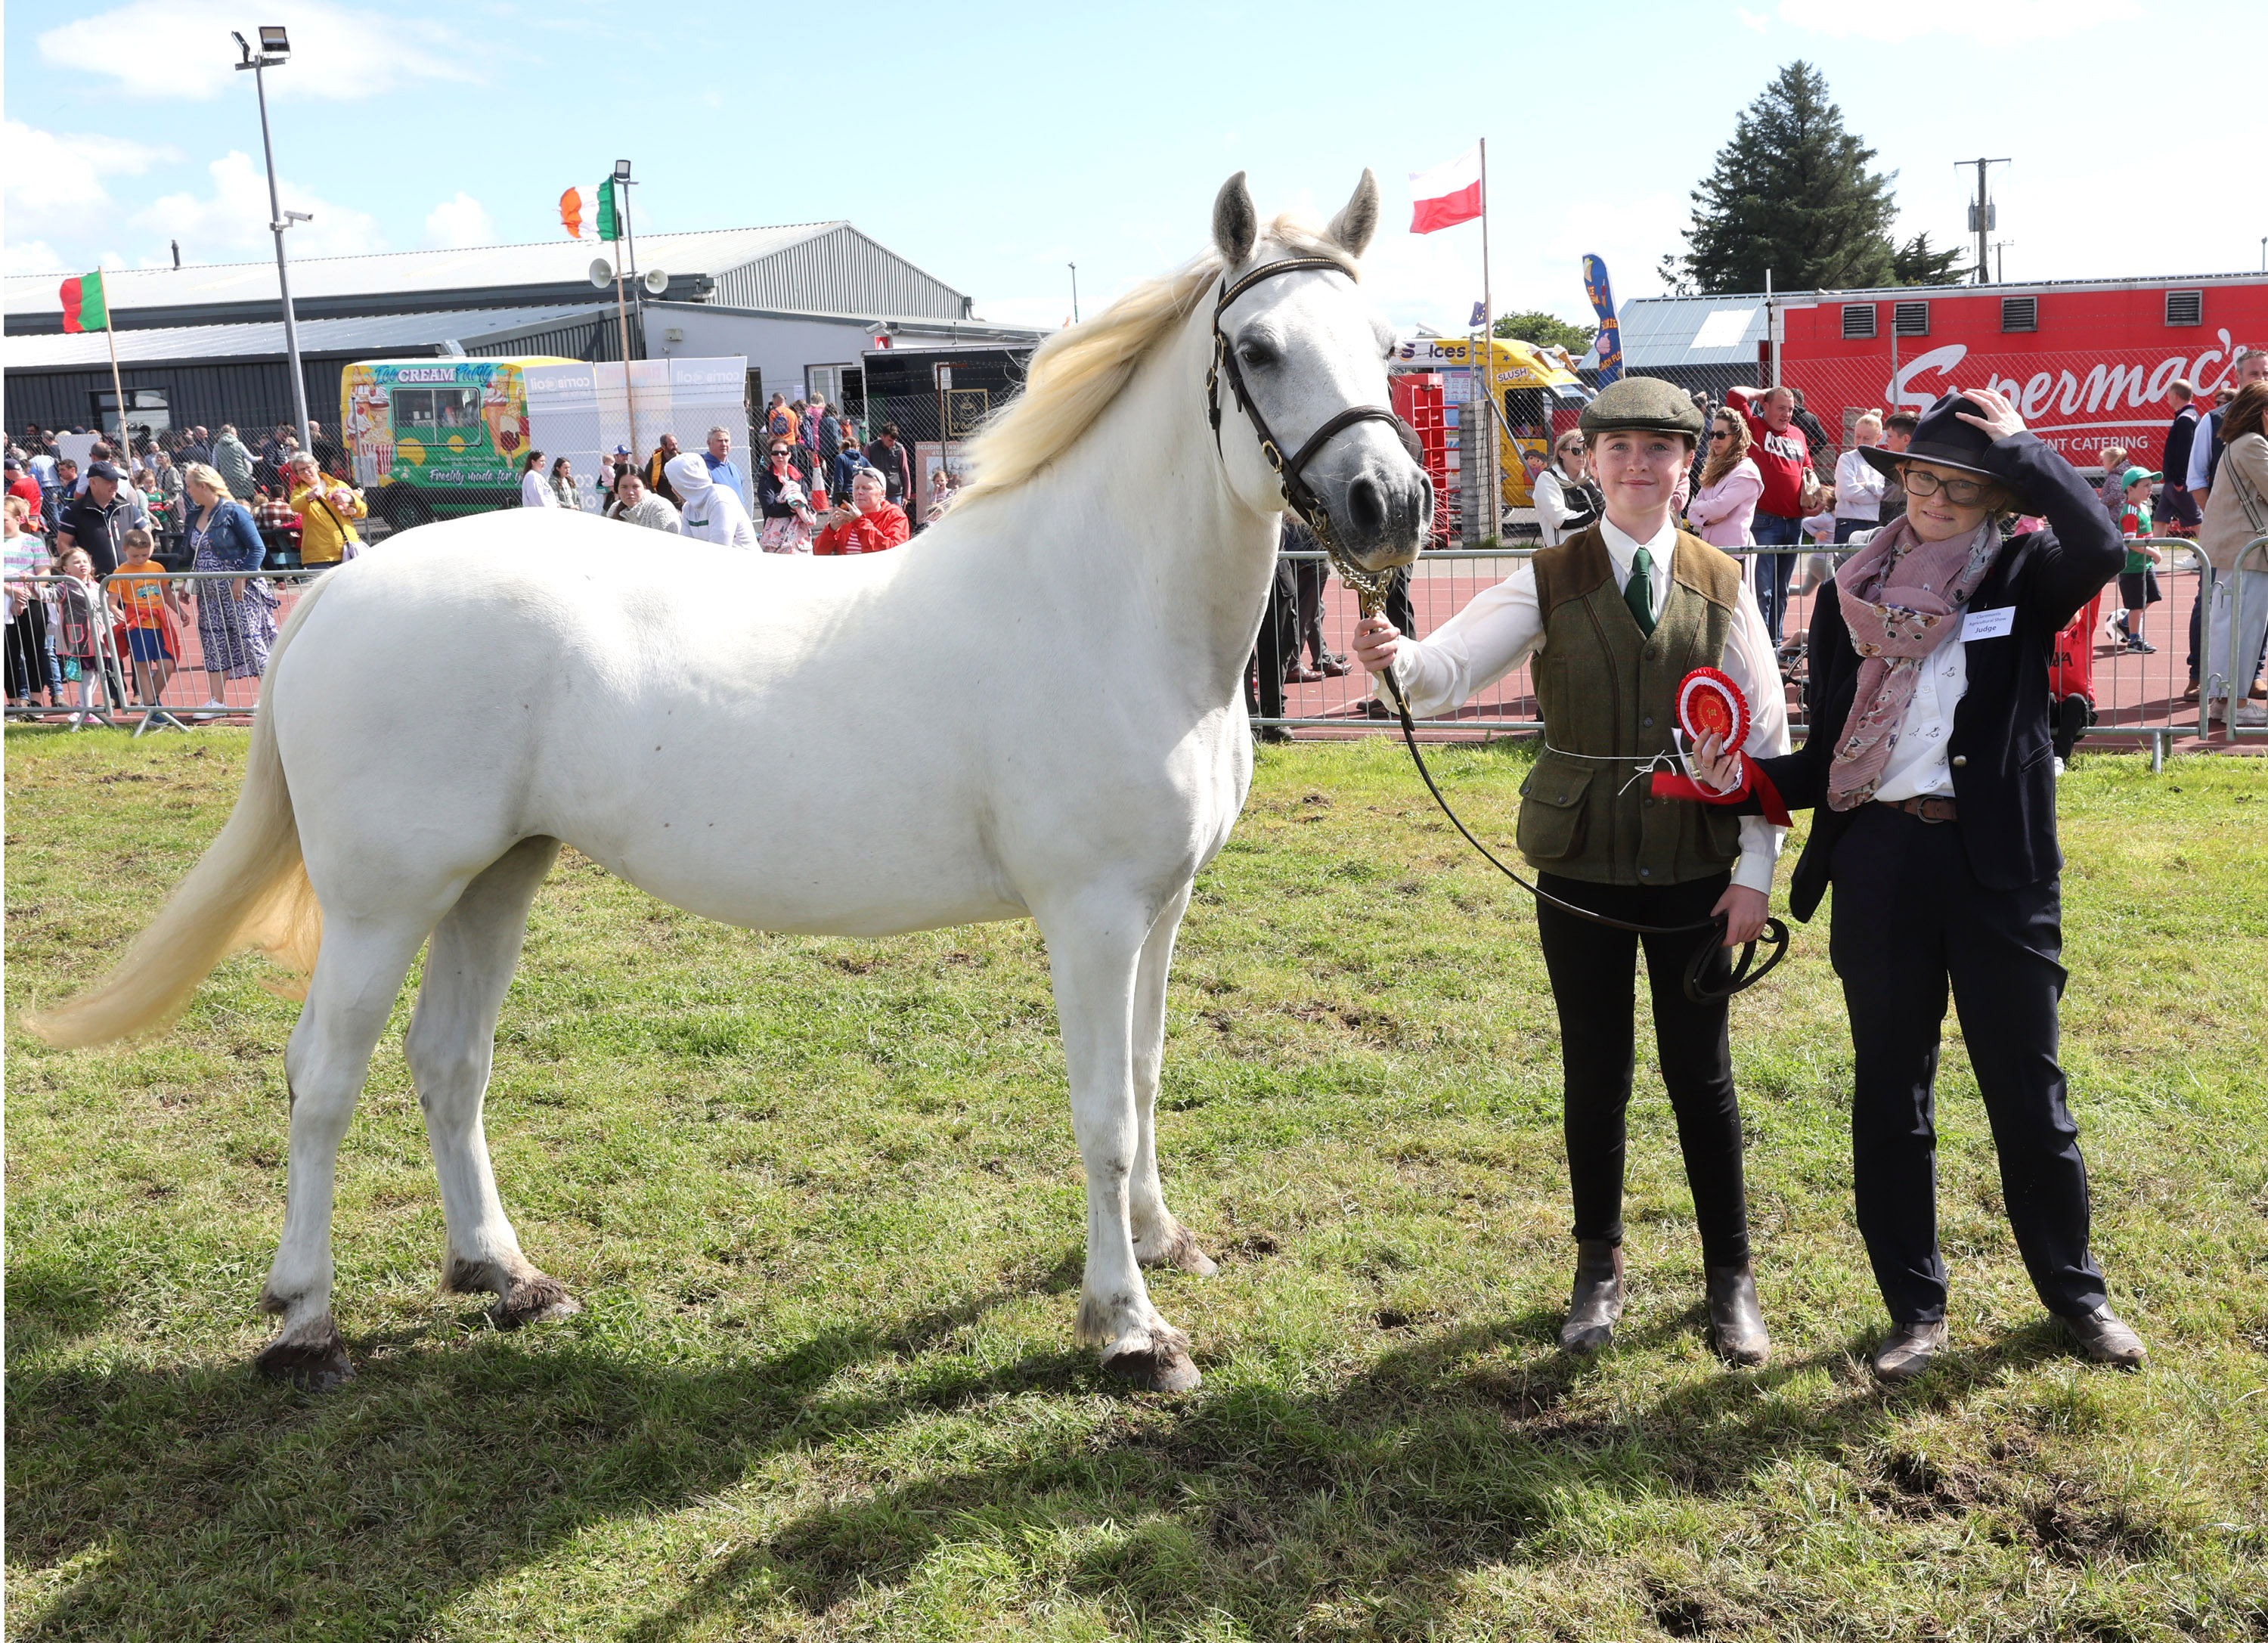 Aoife Gorham,  Ballyconneely Co. Galway was the winner in the "Supermacs & Papa John's Young Handler 11-16 years competition" pictured with Laura McWeeny, Judge at the Claremorris 103rd Show in the Showgrounds Claremorris. Photo © Michael Donnelly